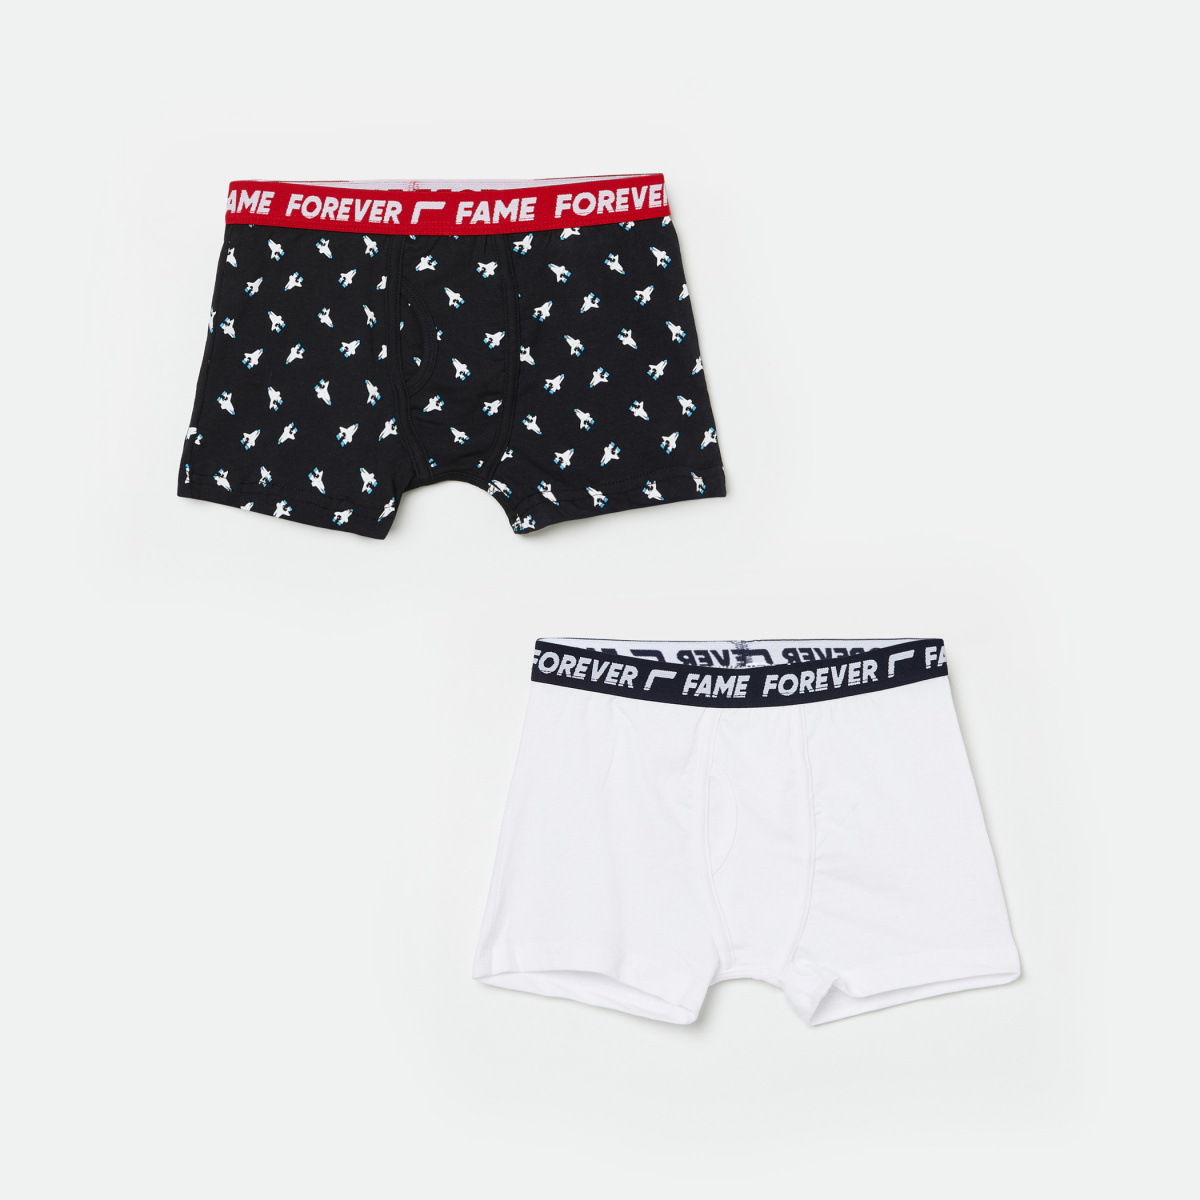 FAME FOREVER Boys Printed Knit Boxers - Pack of 2